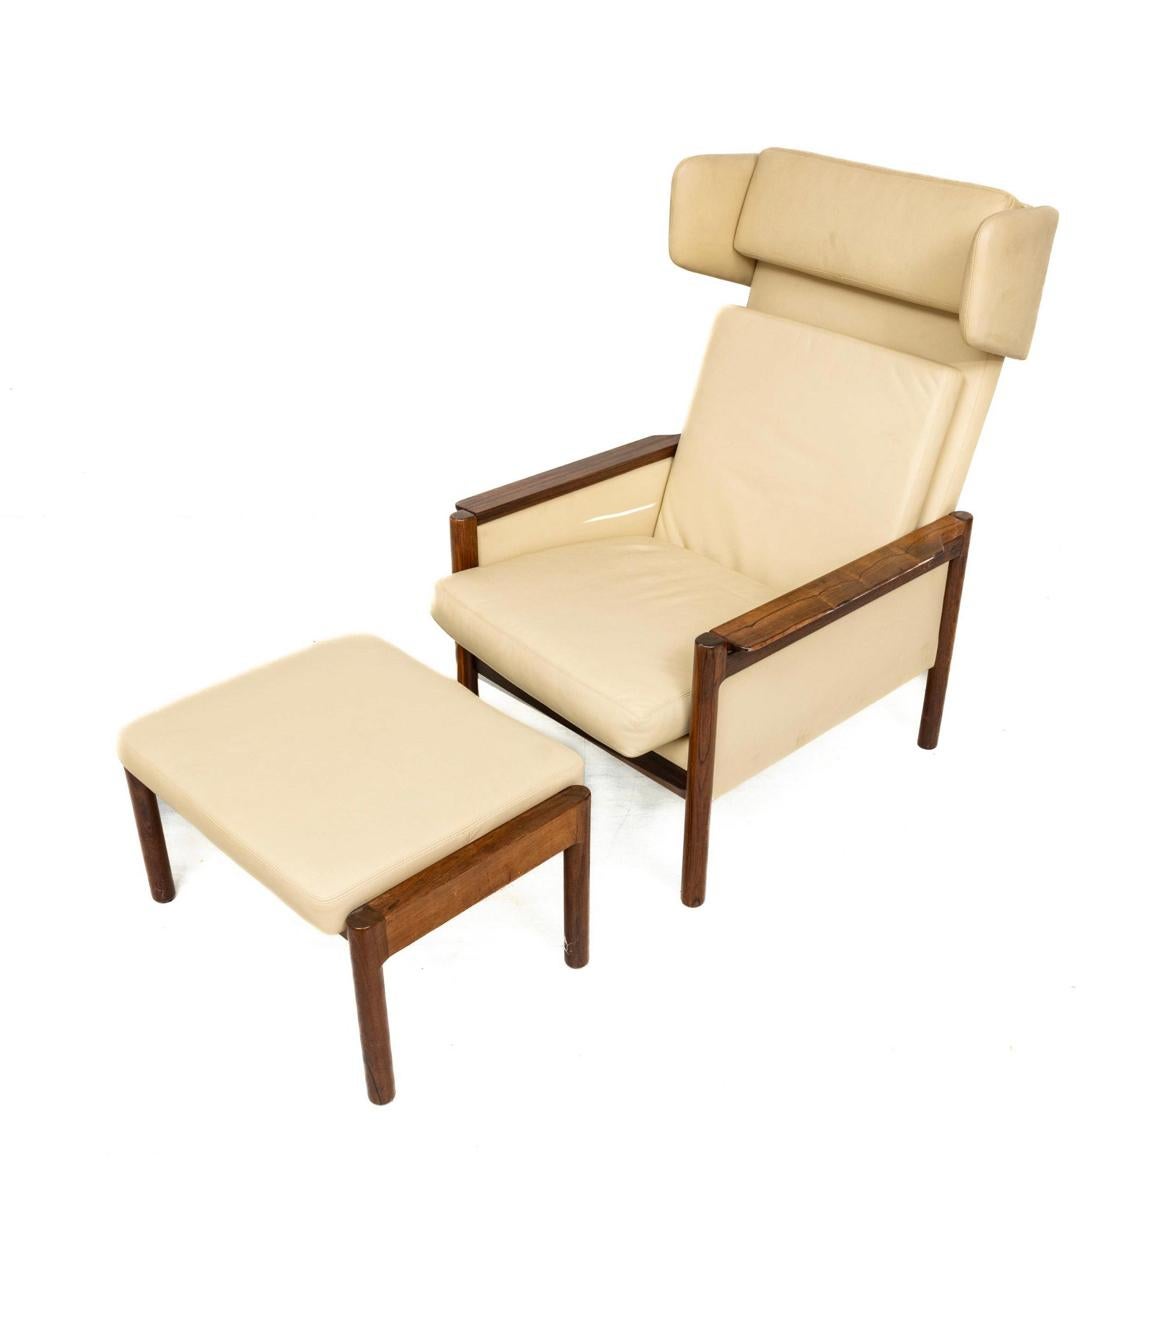 Midcentury Danish Modern leather lounge chair and ottoman Designed by Kurt Østervig Made by Slagelse Møbelværk.
 
Danish modern chair and ottoman. rosewood frame, Off white leather chair and ottoman cushions, wingback style leather headrest. Great